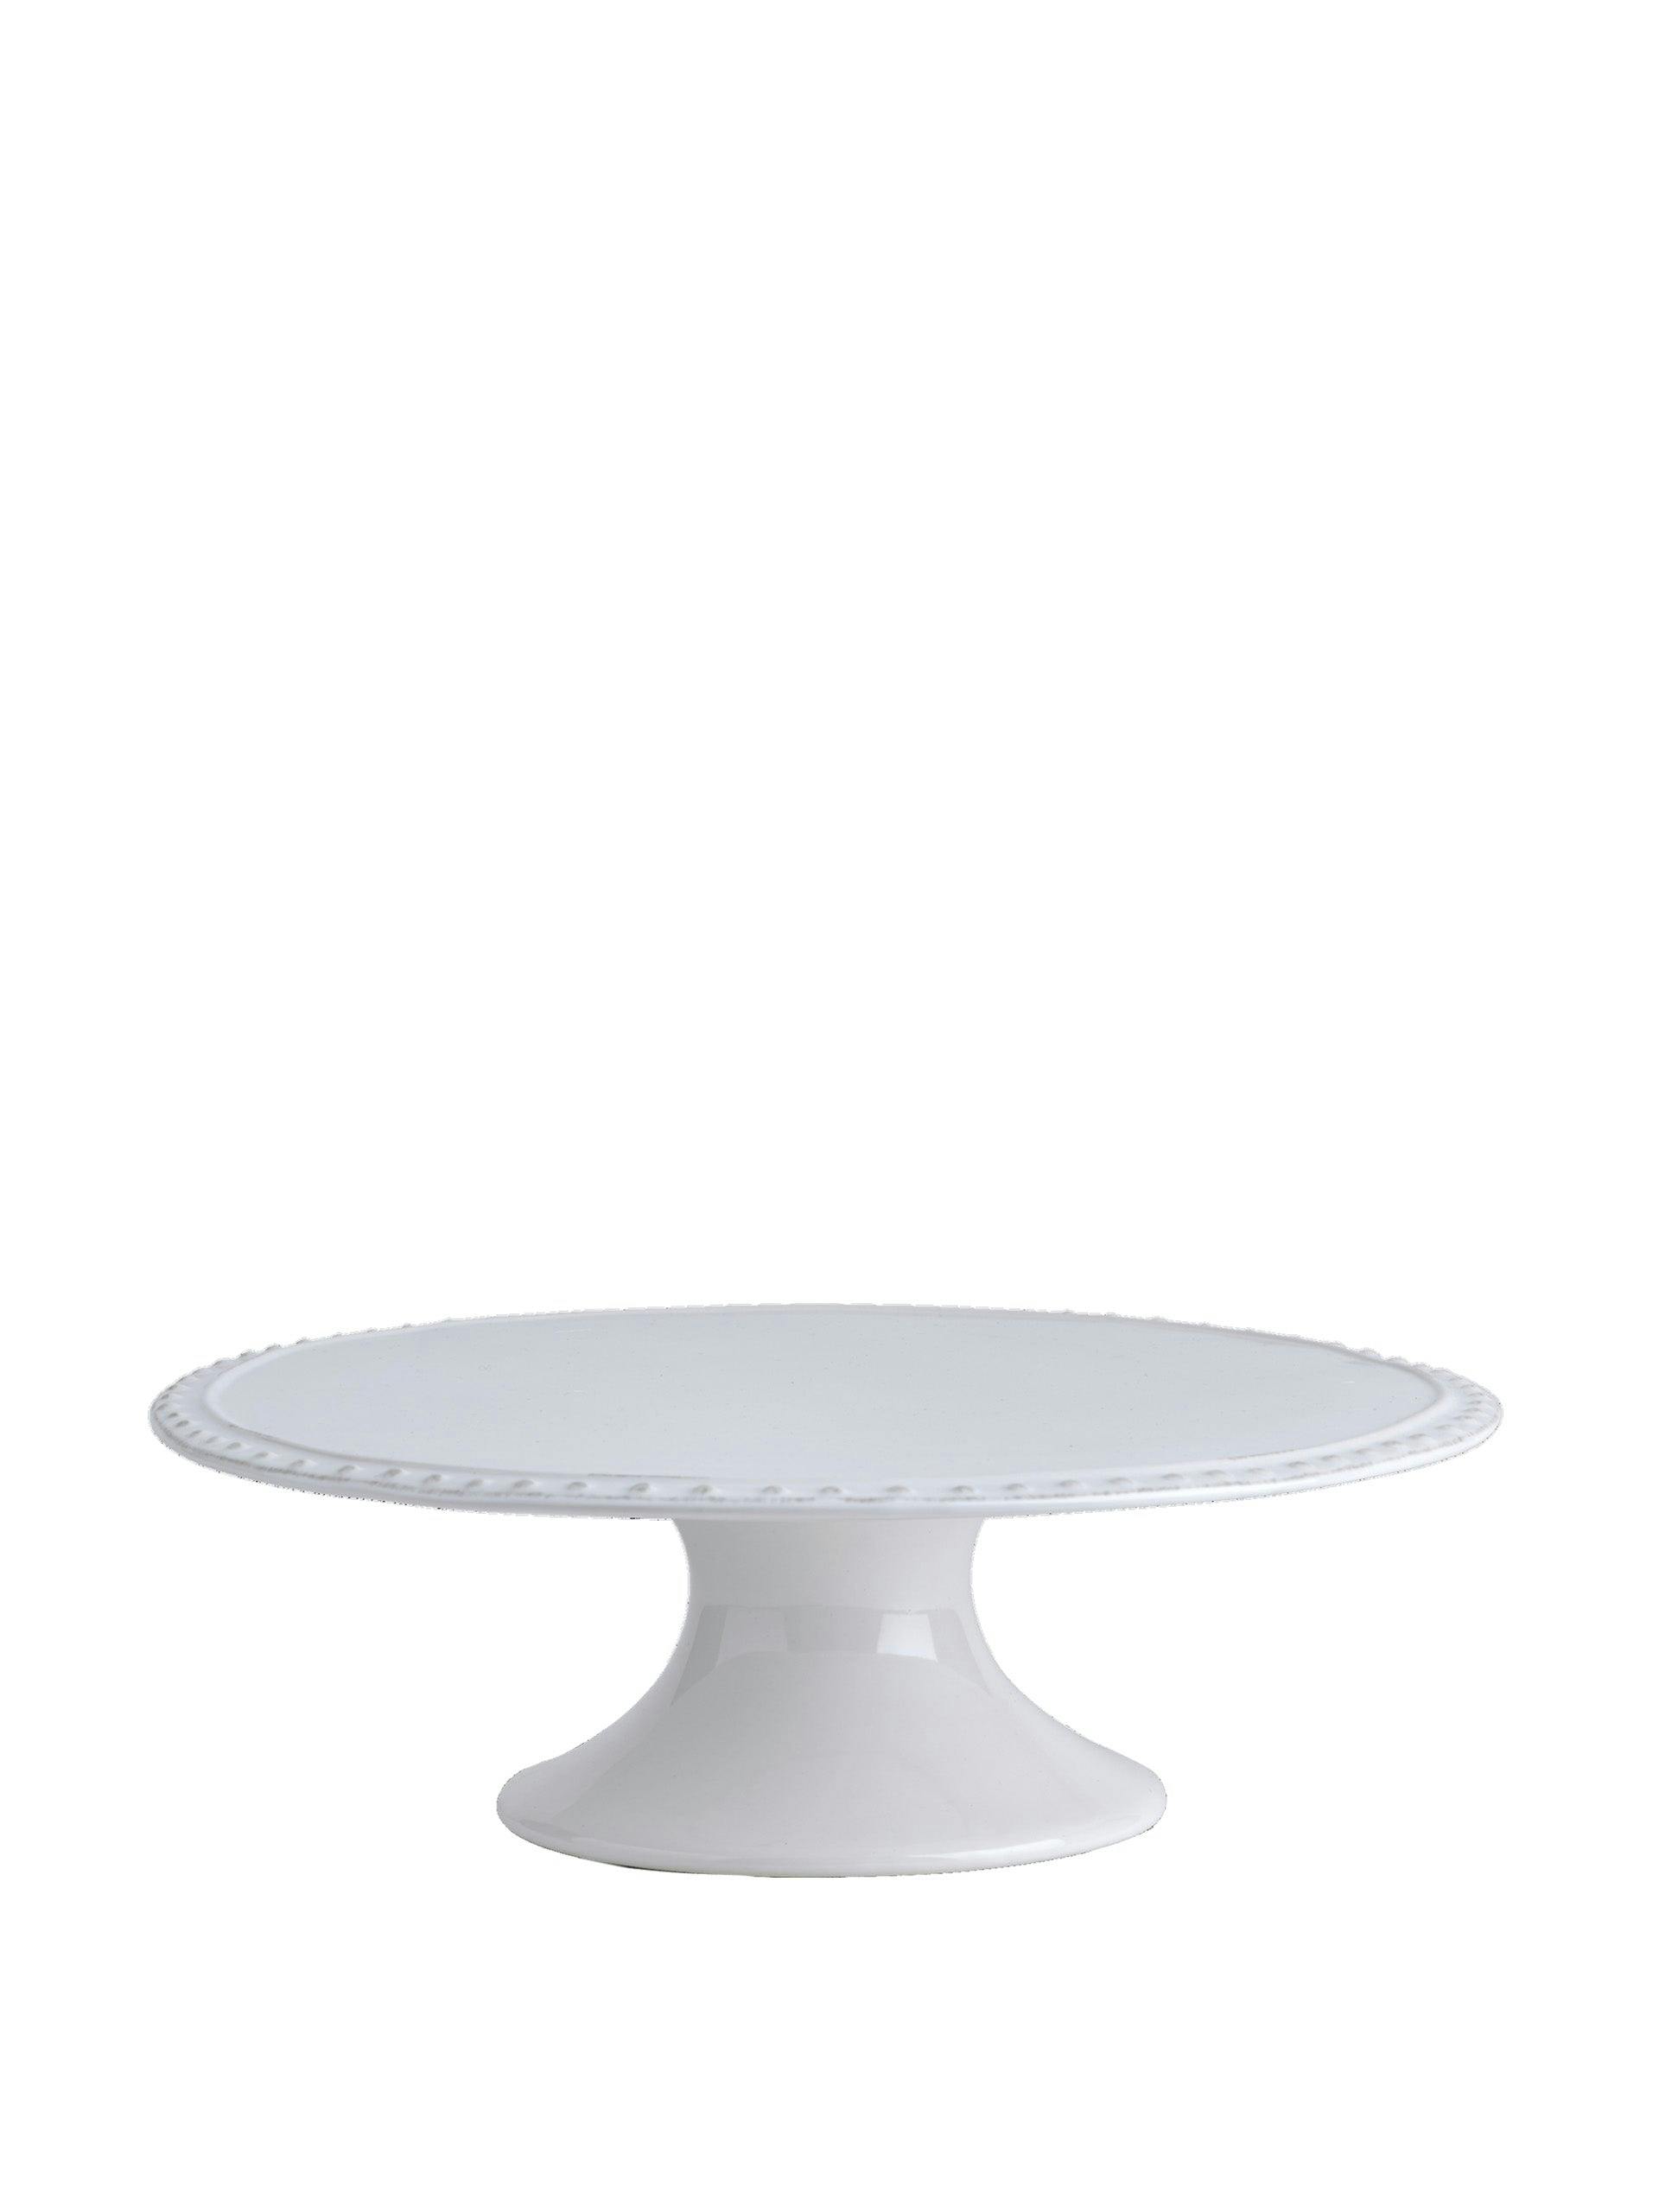 Bowsley cake stand